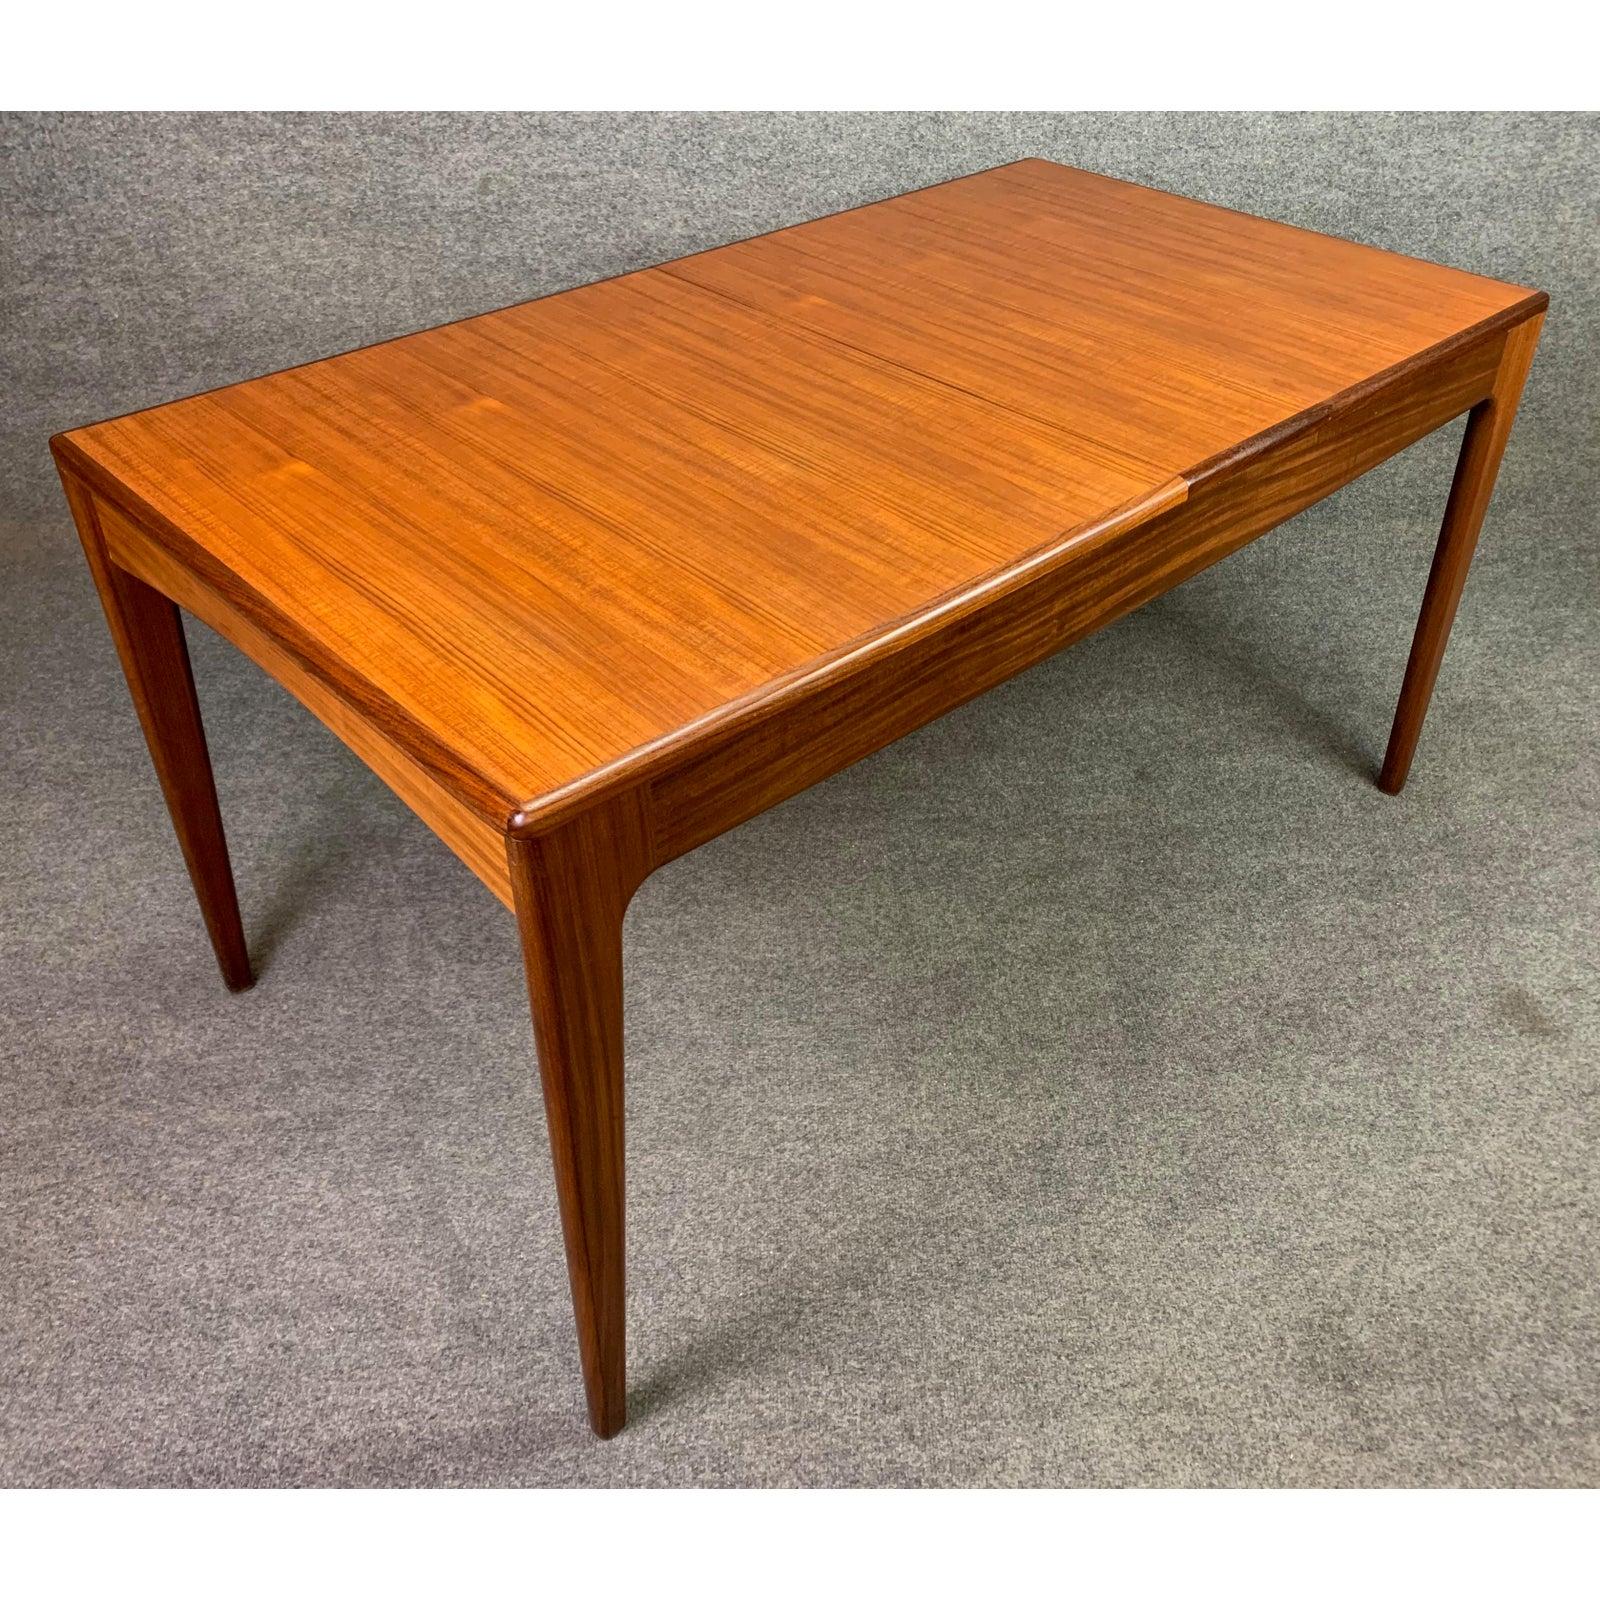 Woodwork Vintage British Midcentury Teak Dining Table by John Herbert for A. Younger